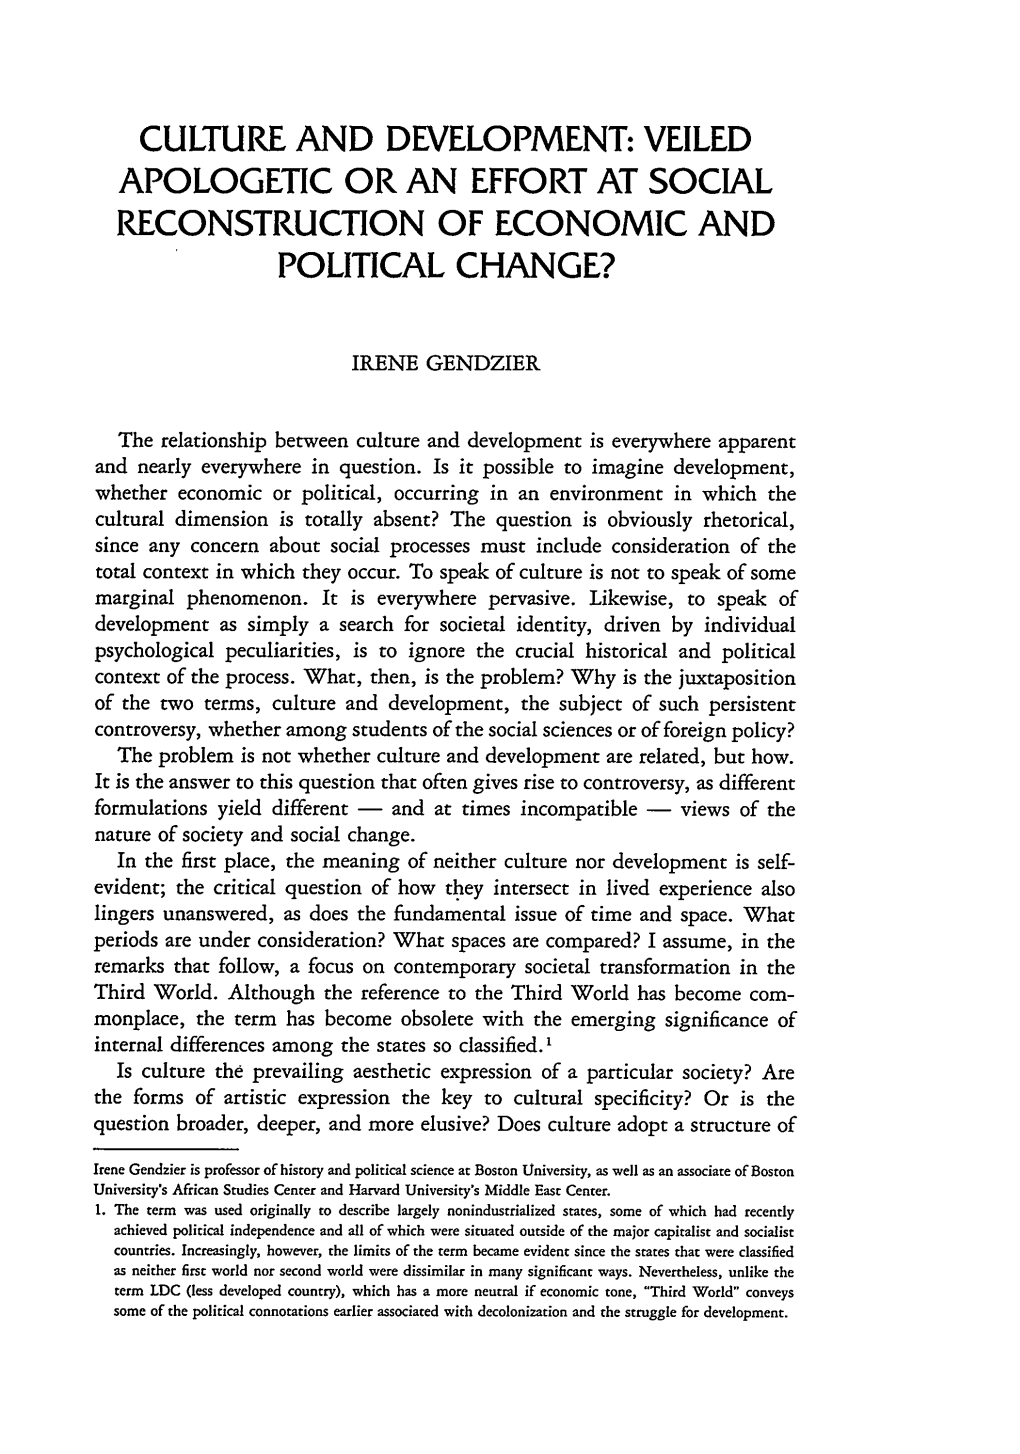 Veiled Apologetic Or an Effort at Social Reconstruction of Economic and Political Change?